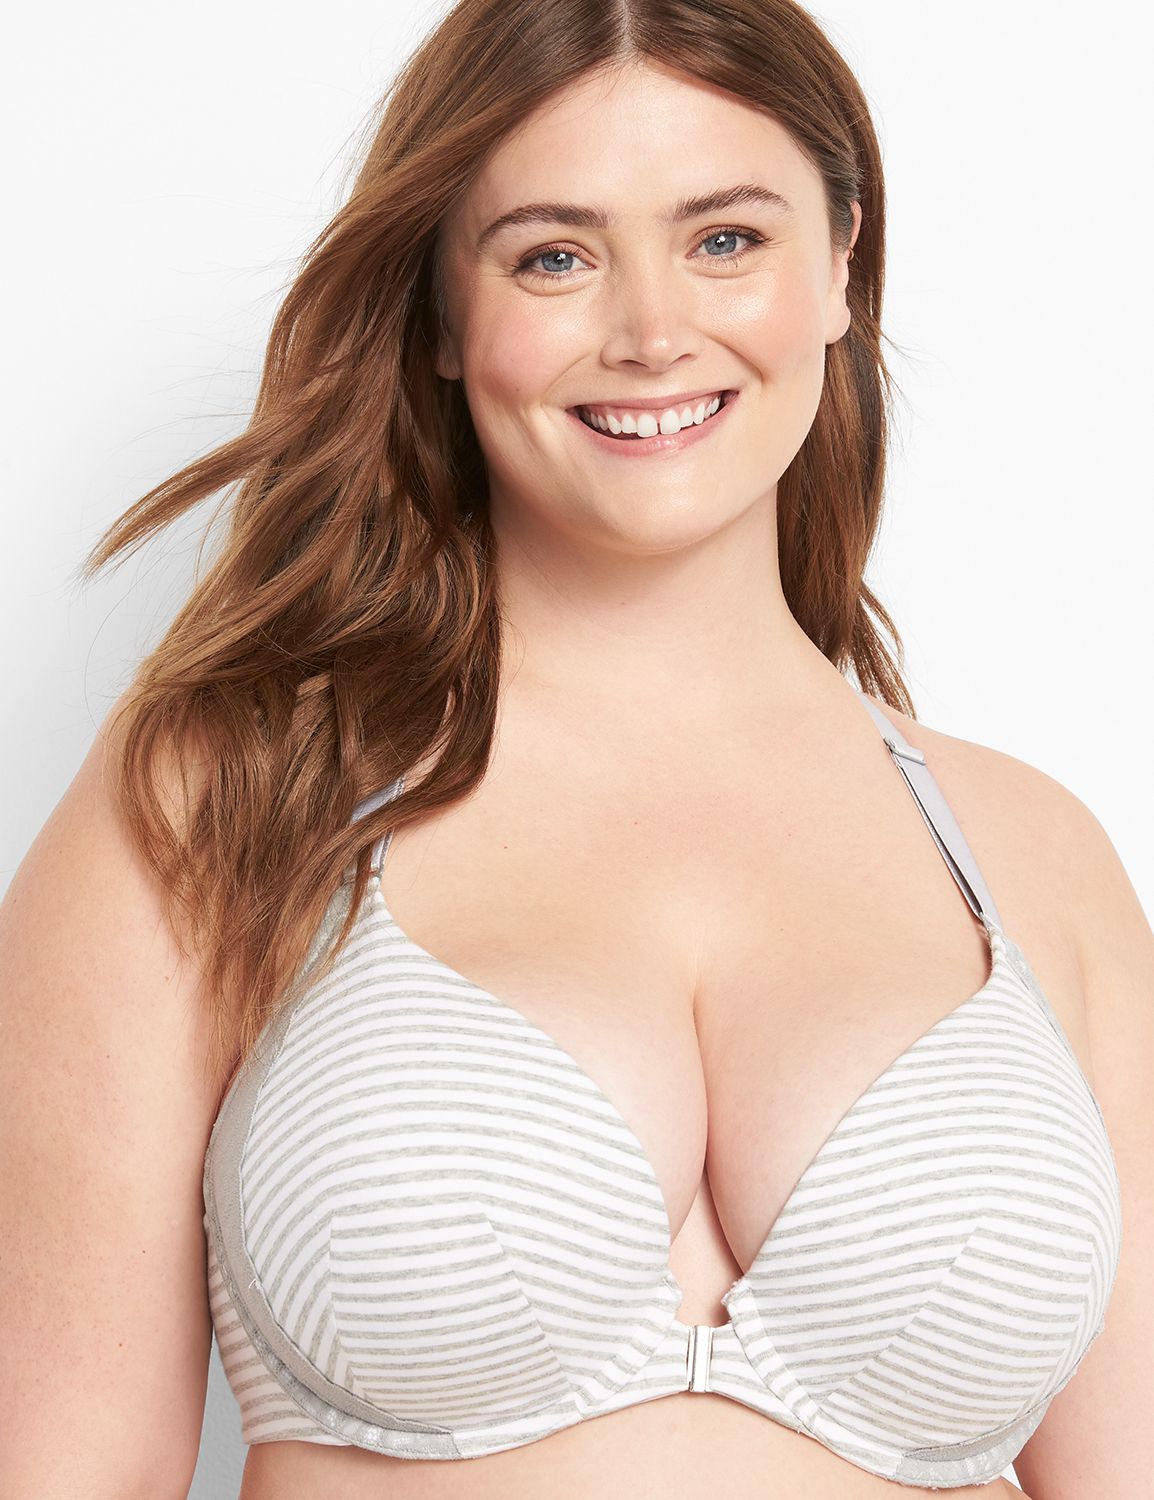 Buy SHEWEARS Full Coverage Front Open Pushup White and Black Bra